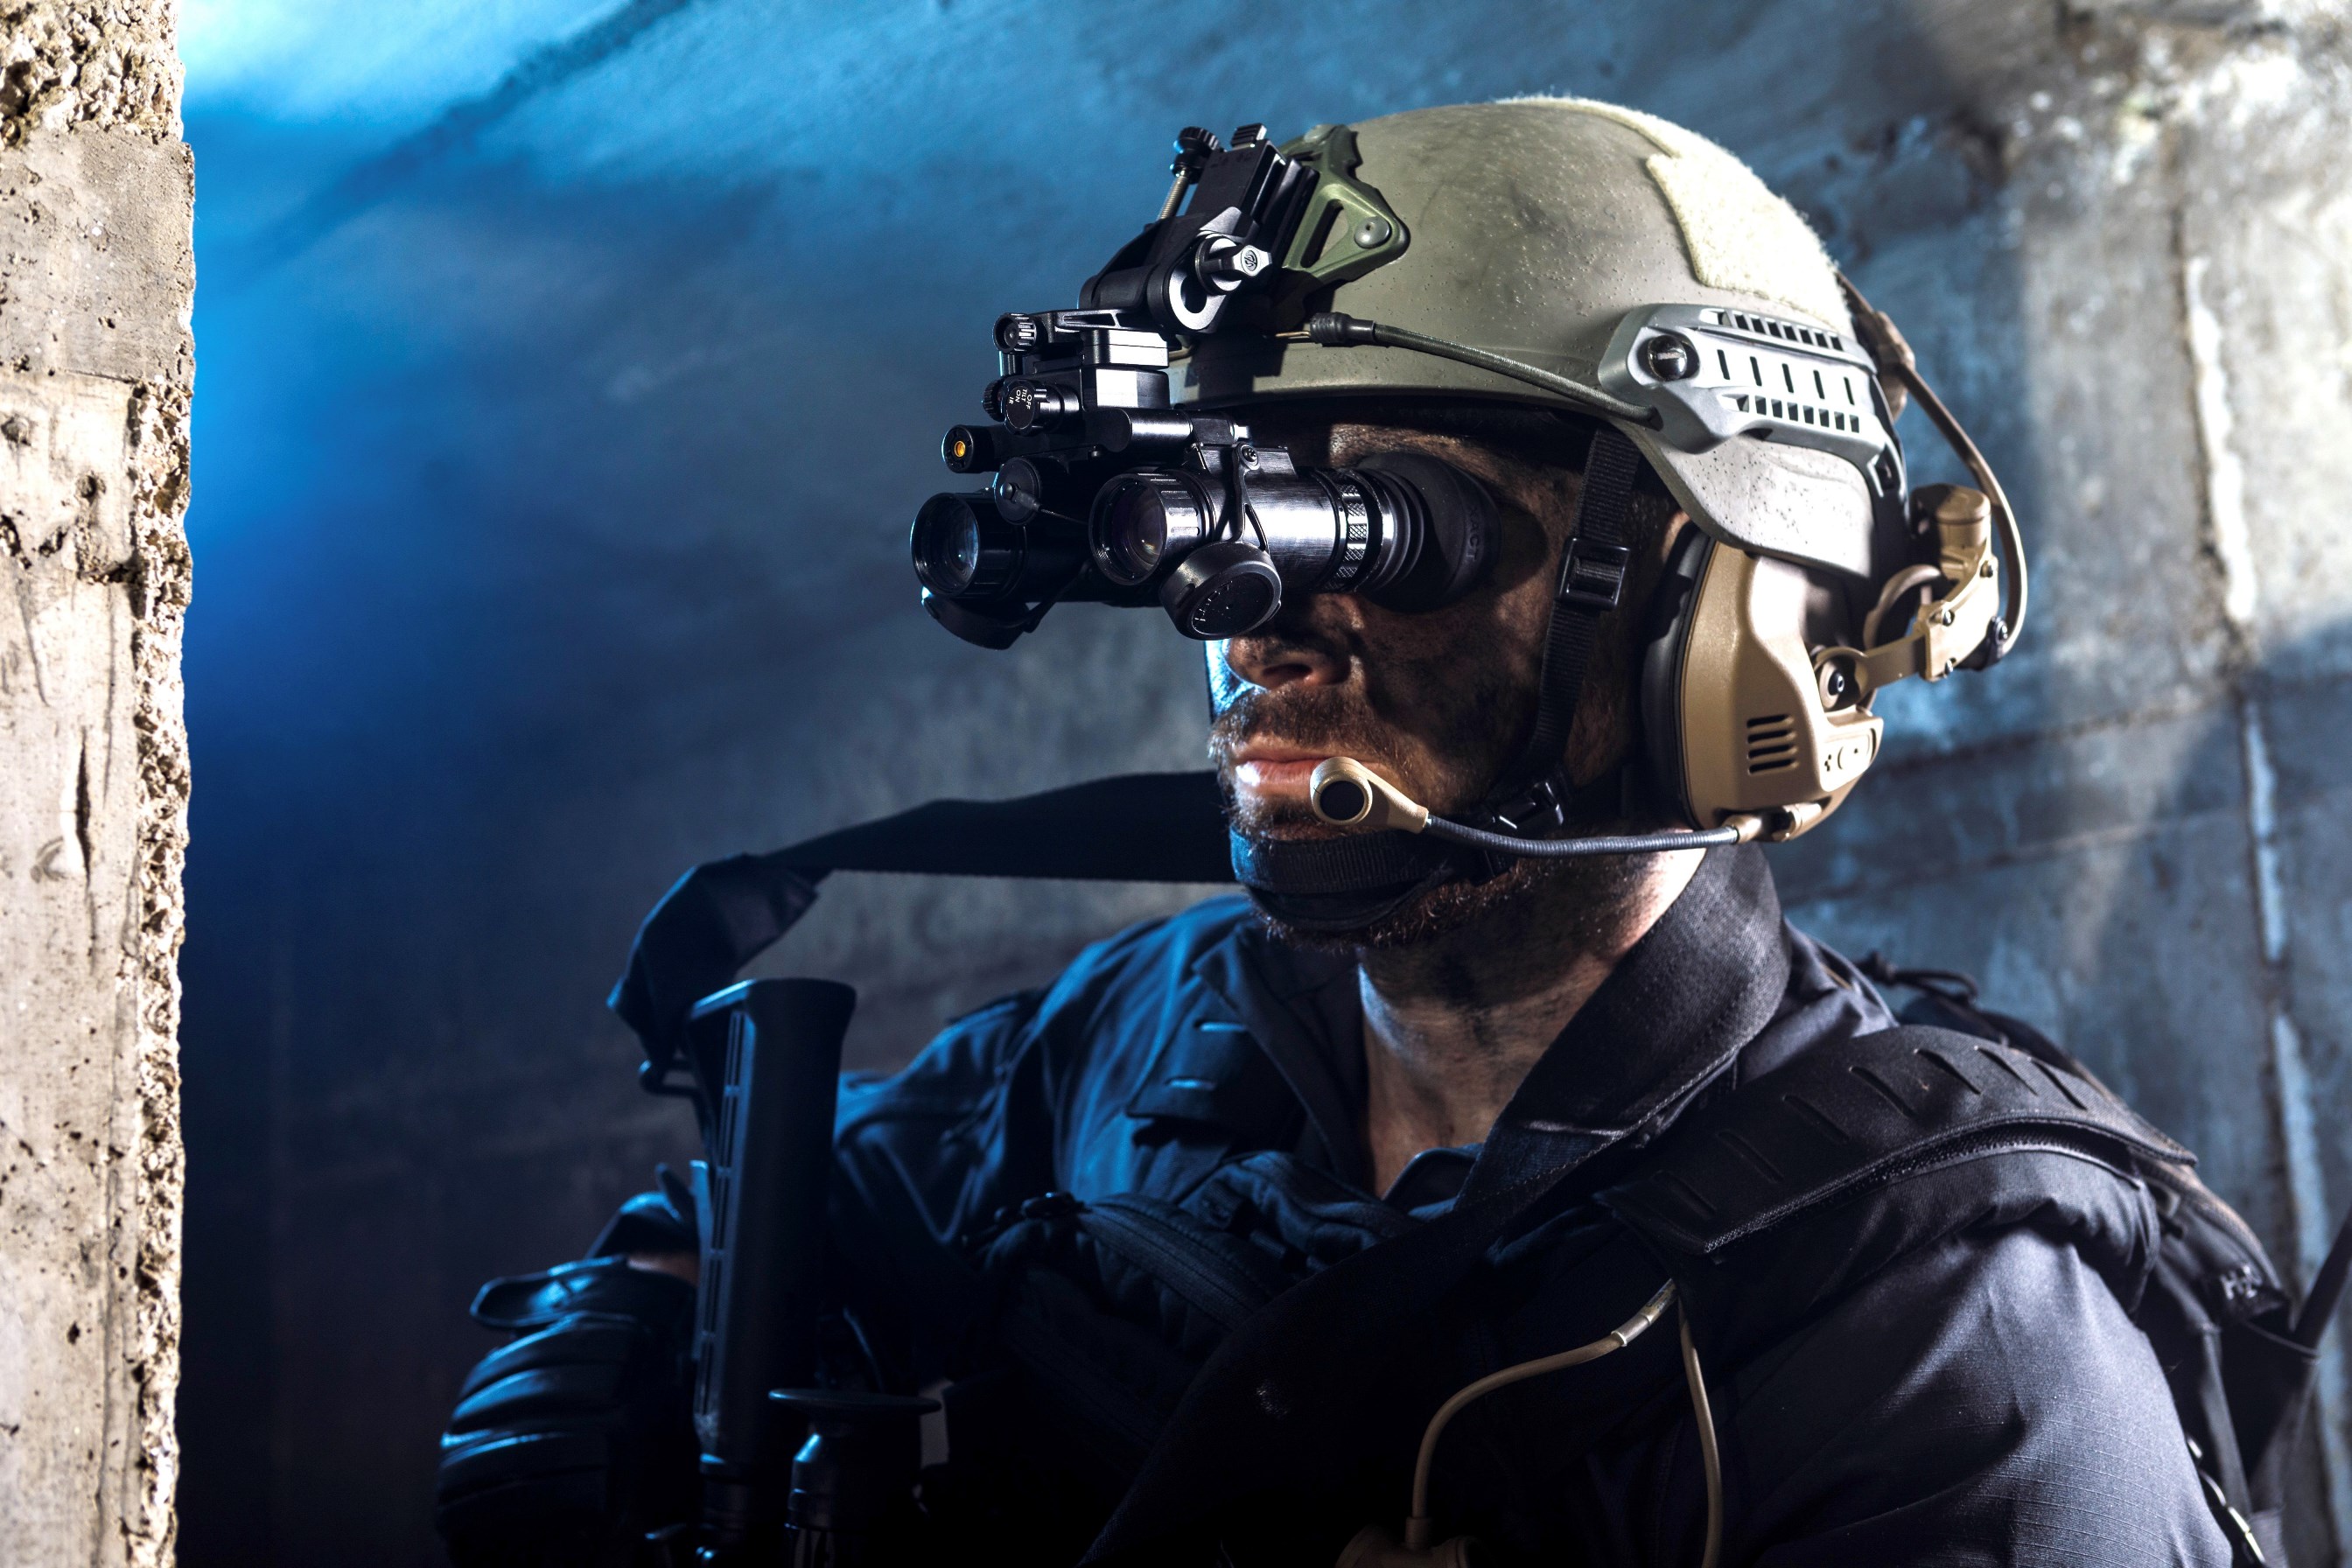 A solider wearing night vision goggles manufactured by Elbit Systems